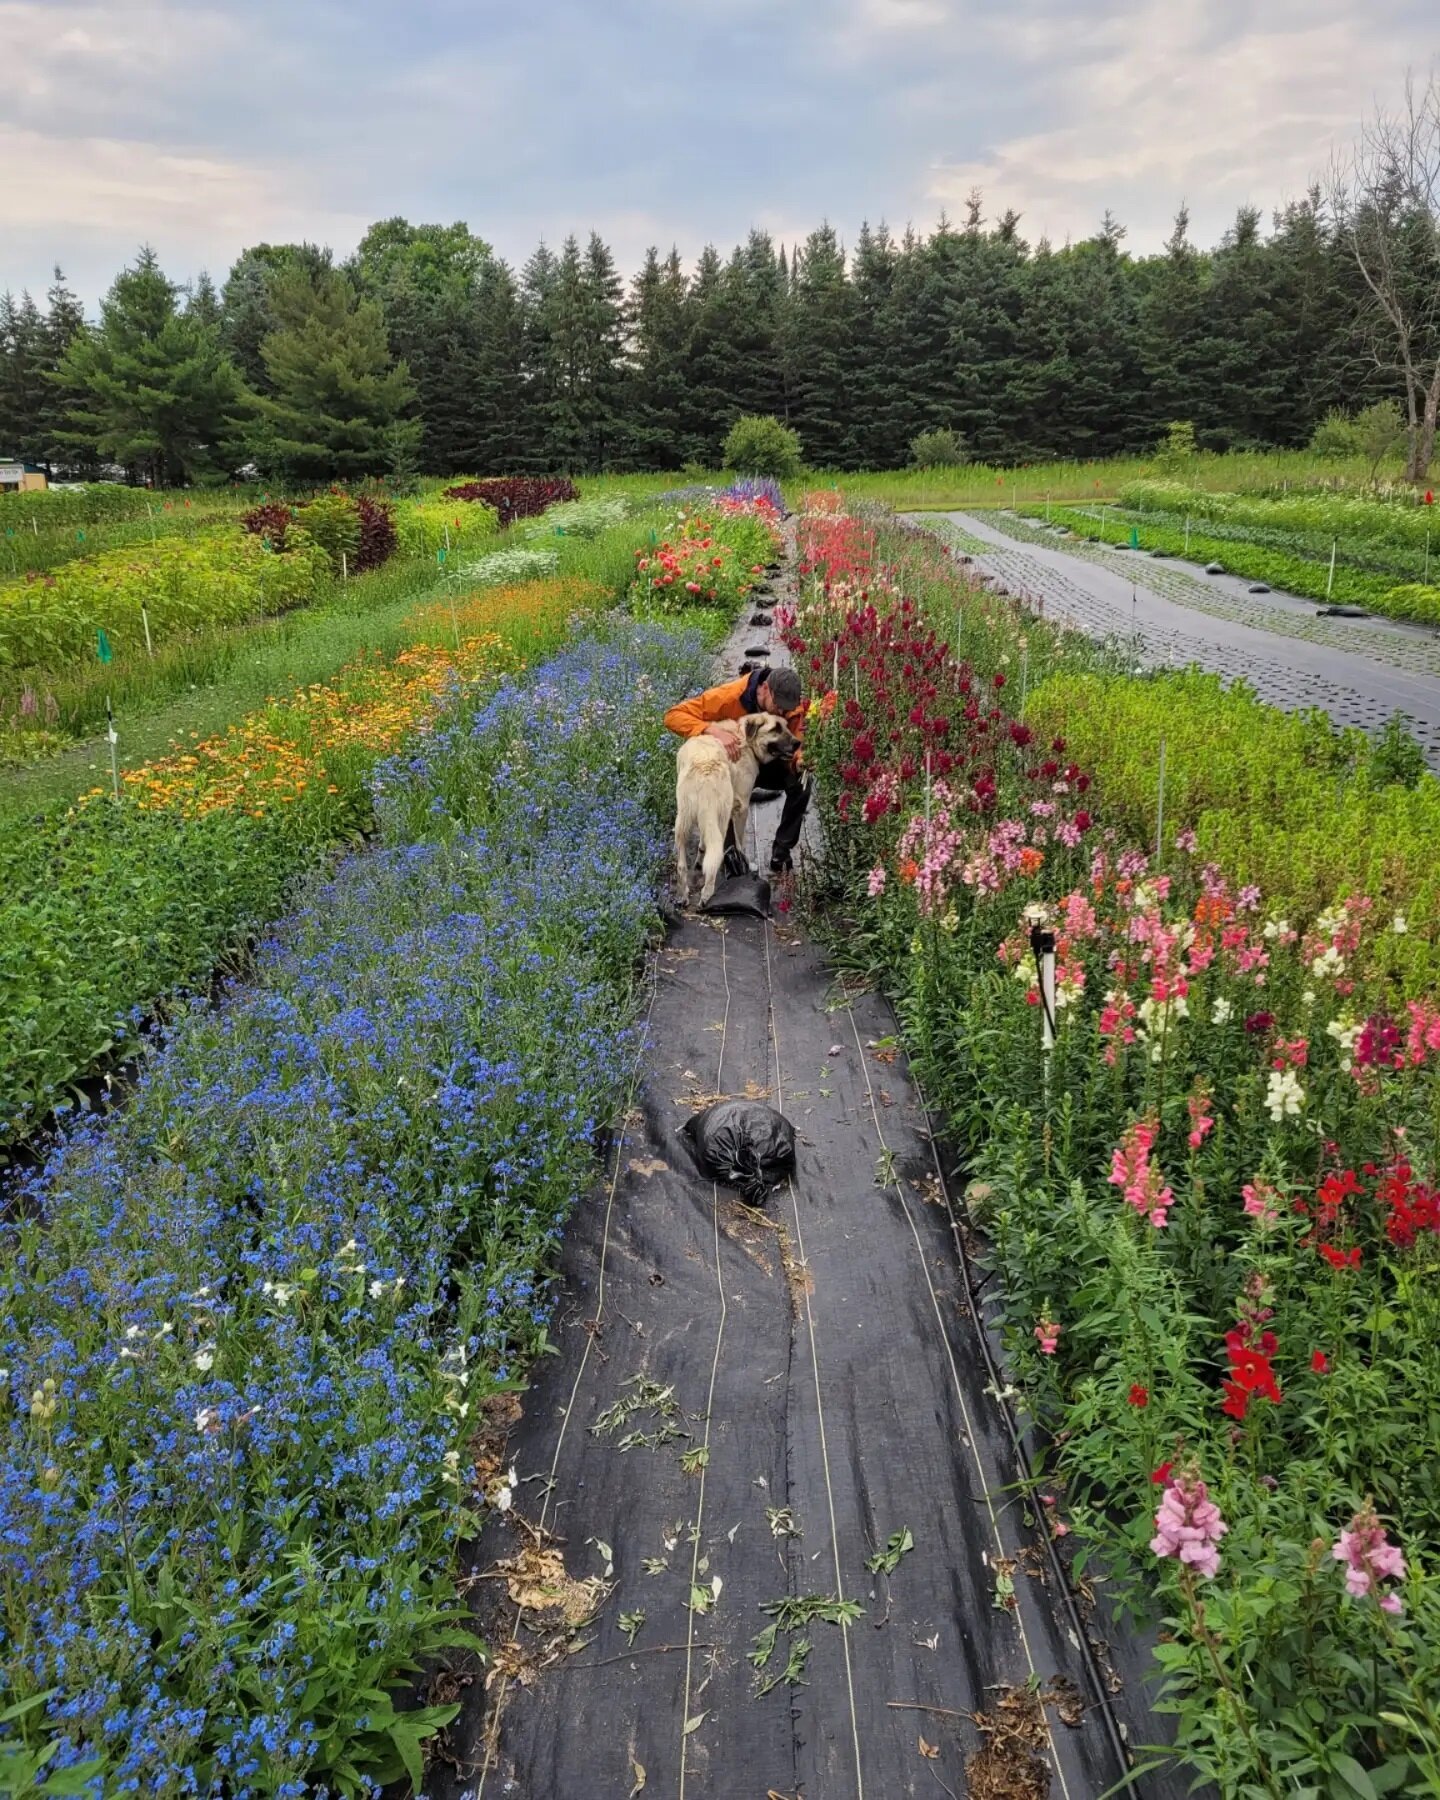 The YOOP pick flower field over at @rockriverfarm is so very dreamy. Even Richard made an appearance! 

Brighten up your day by picking yourself a bouquet - we all deserve it 🌻⚘🌼